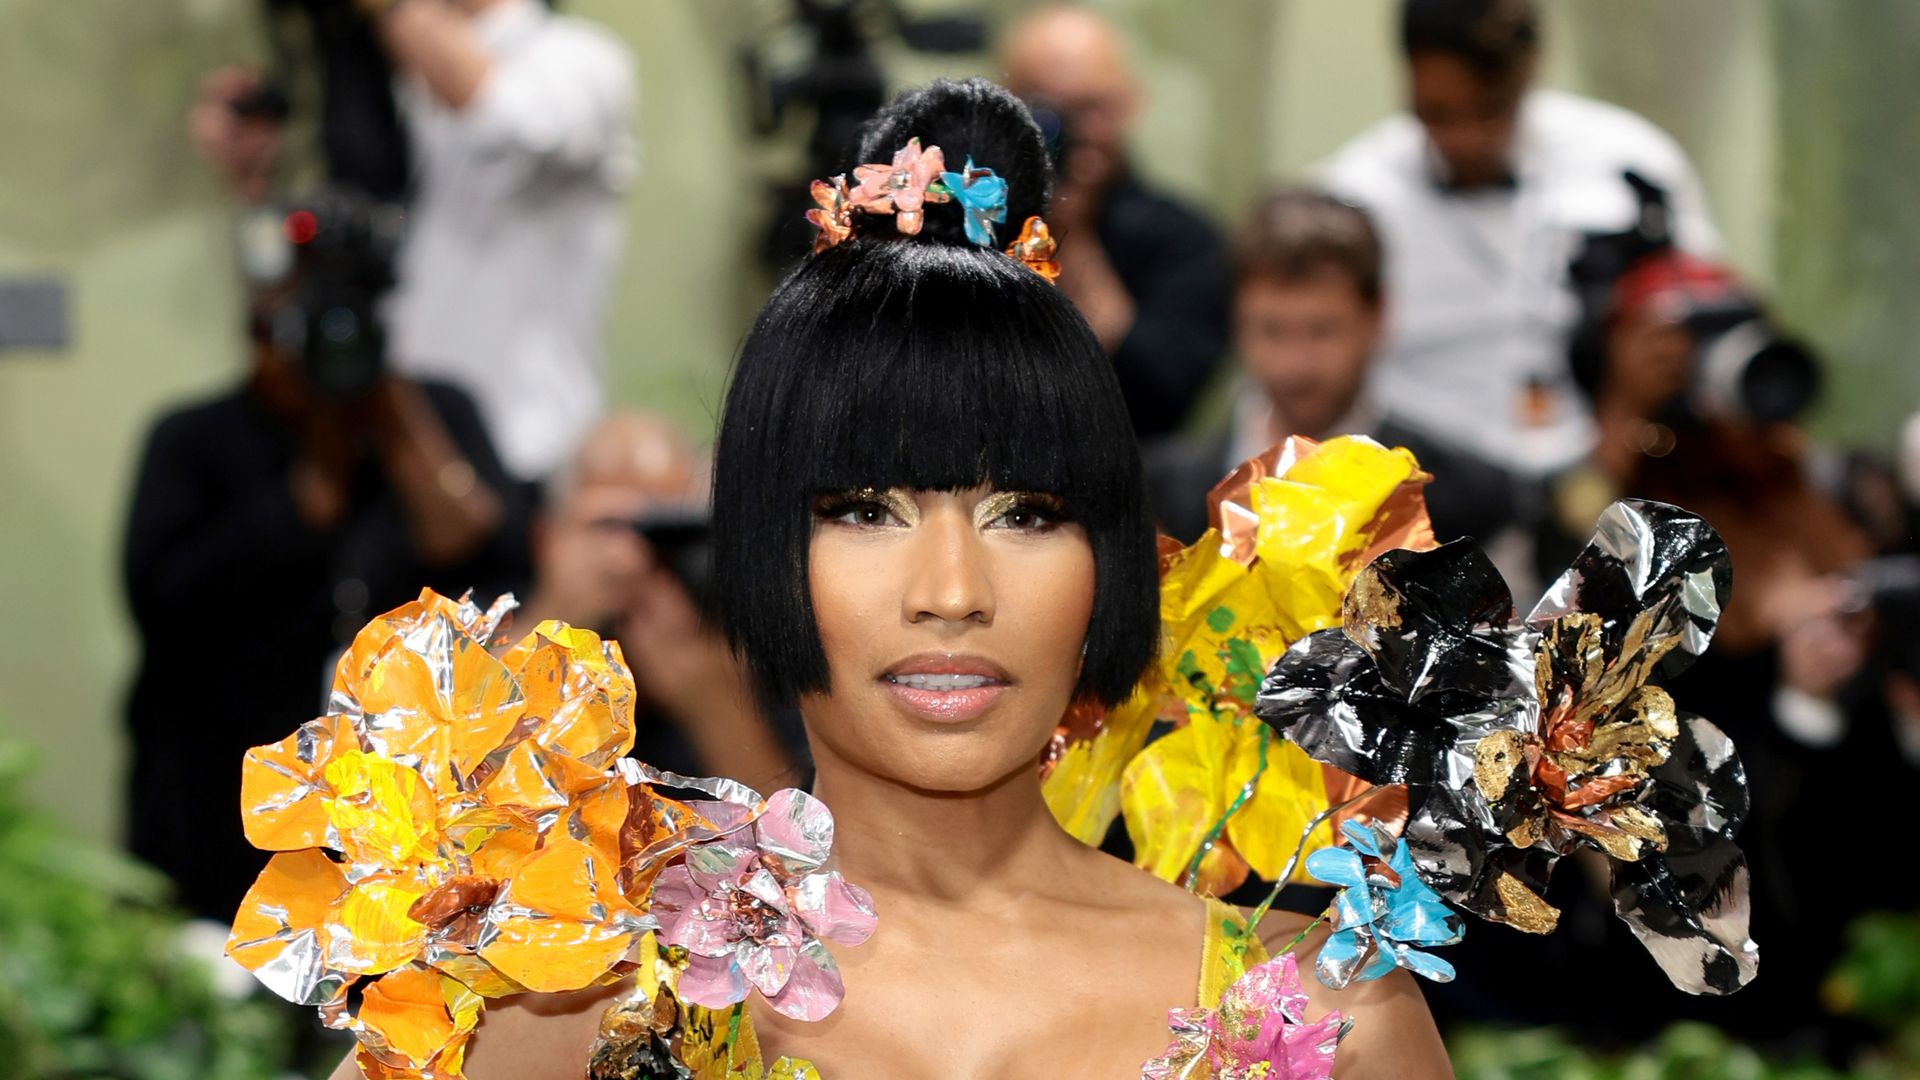 All we know about Nicki Minaj's arrest in Amsterdam for 'carrying drugs'